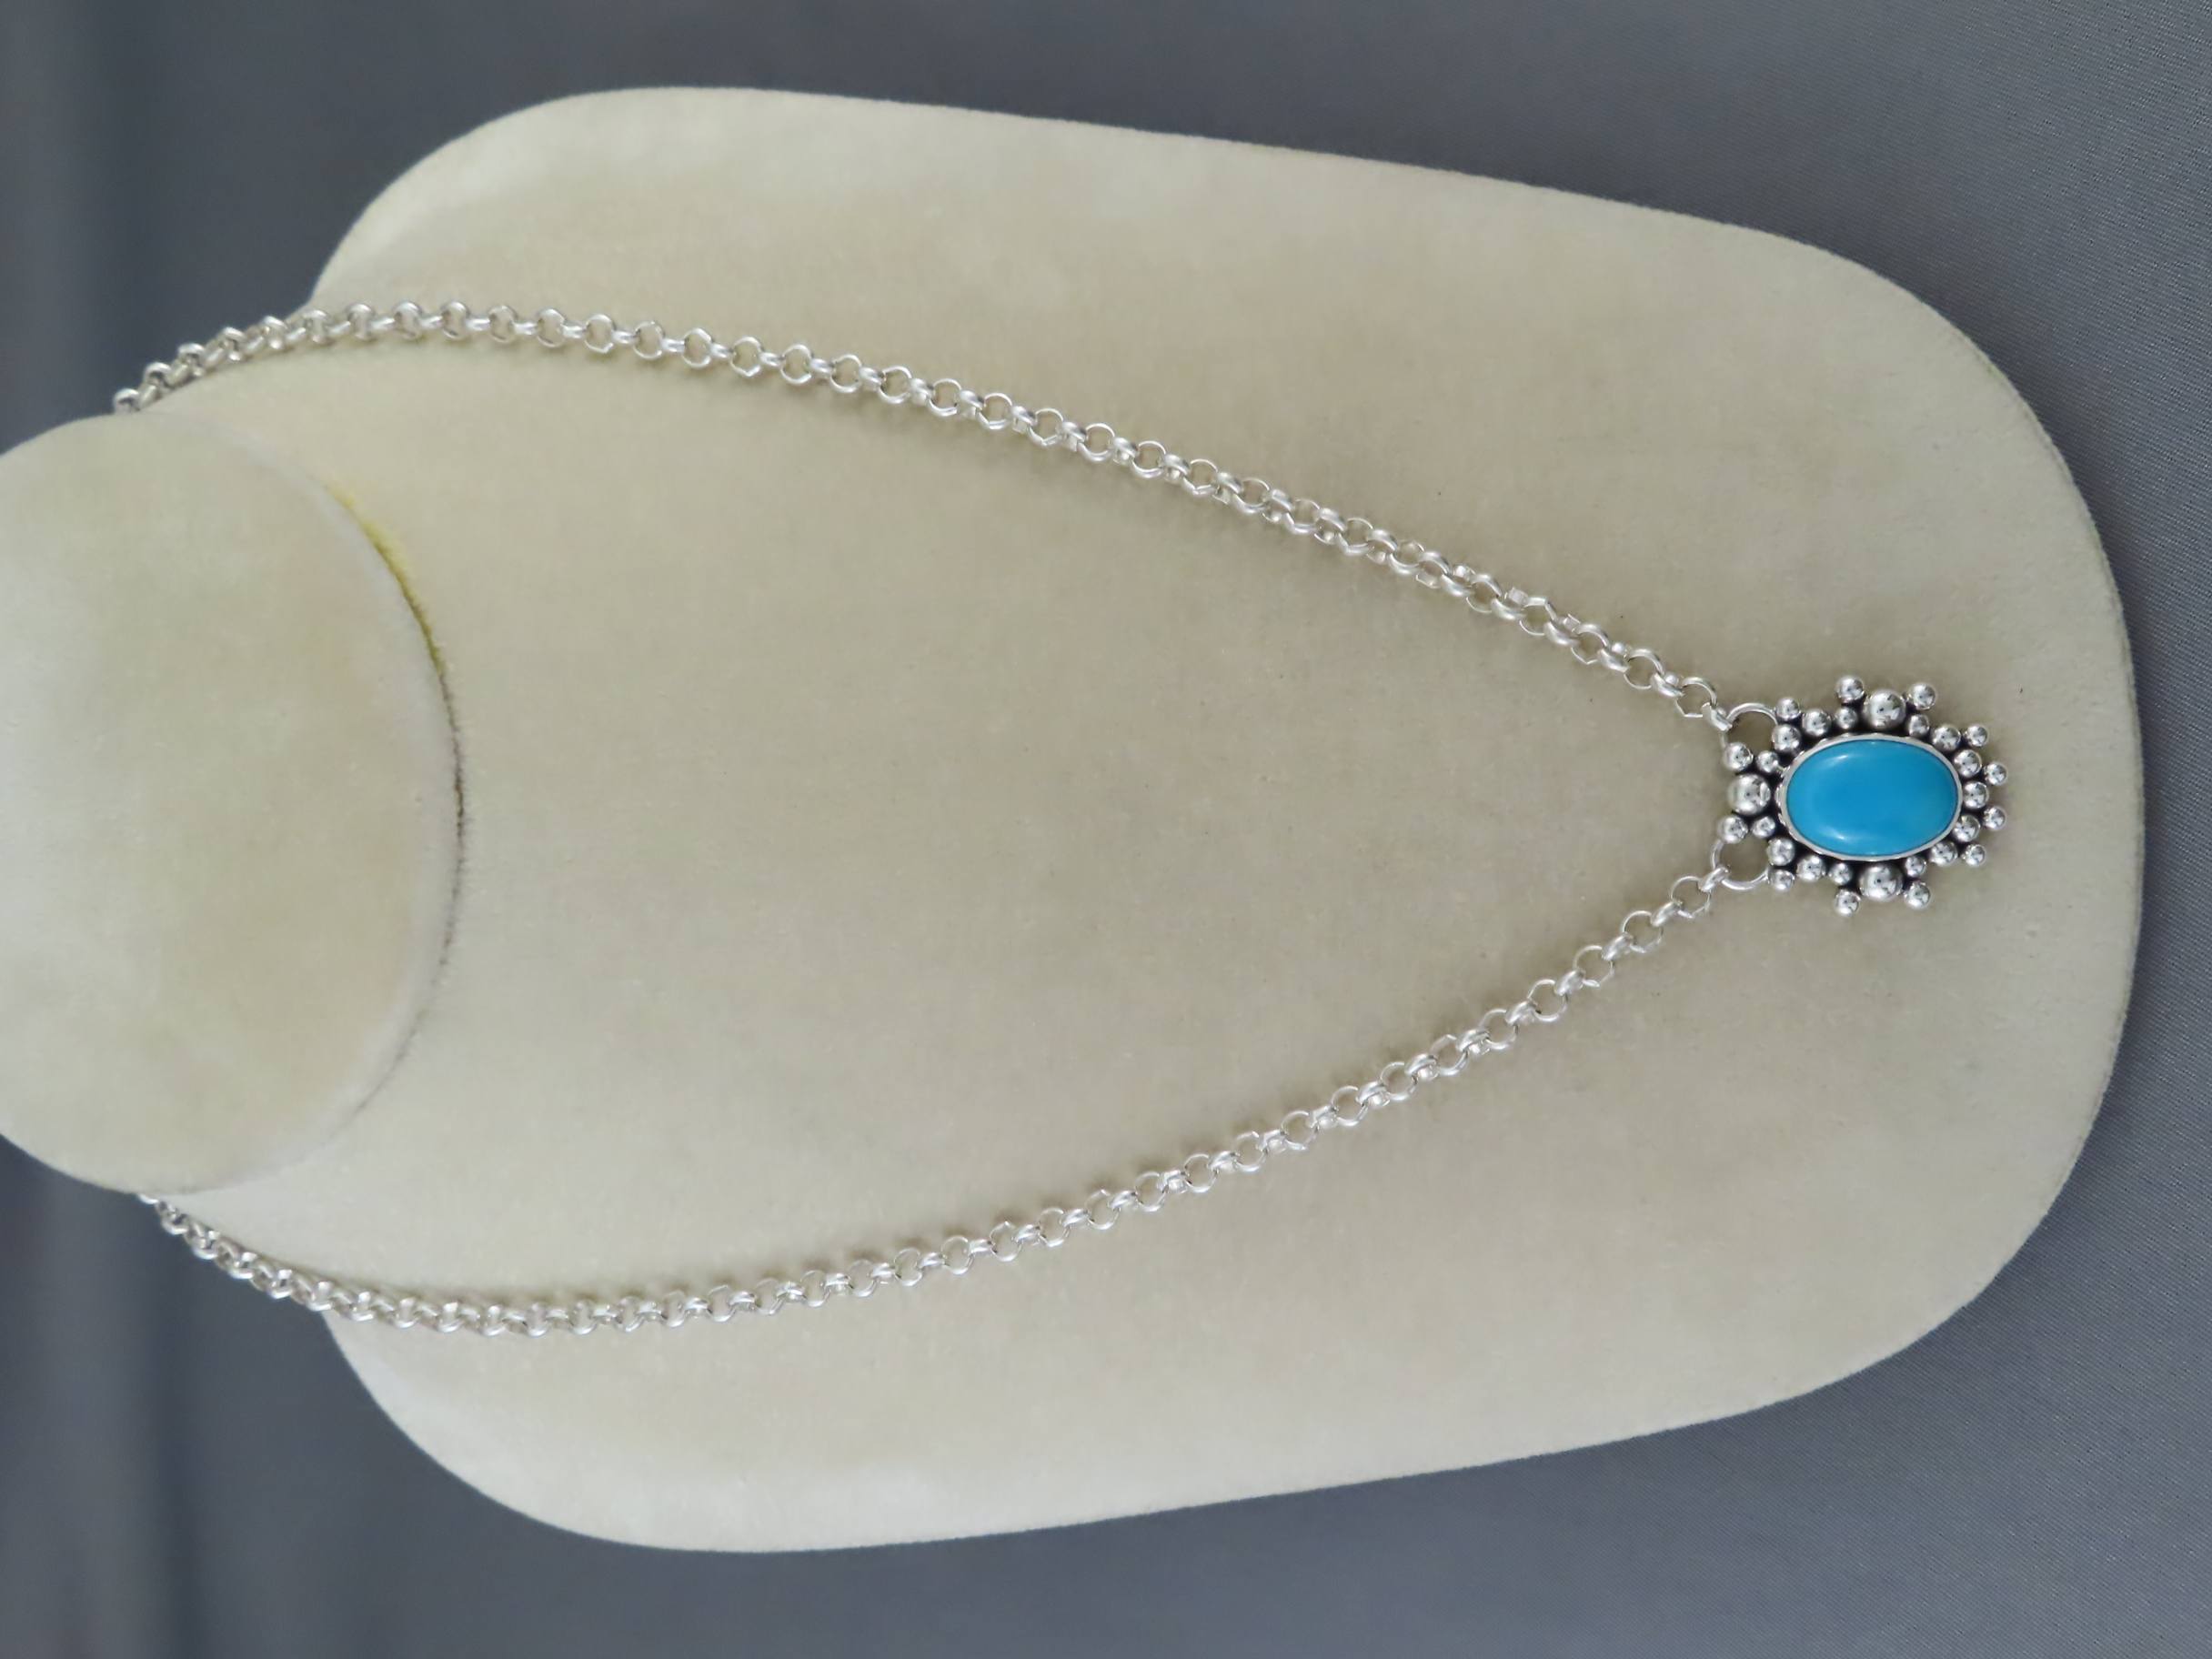 Sleeping Beauty Turquoise Pendant Necklace by Native American jewelry artist, Artie Yellowhorse $425- FOR SALE